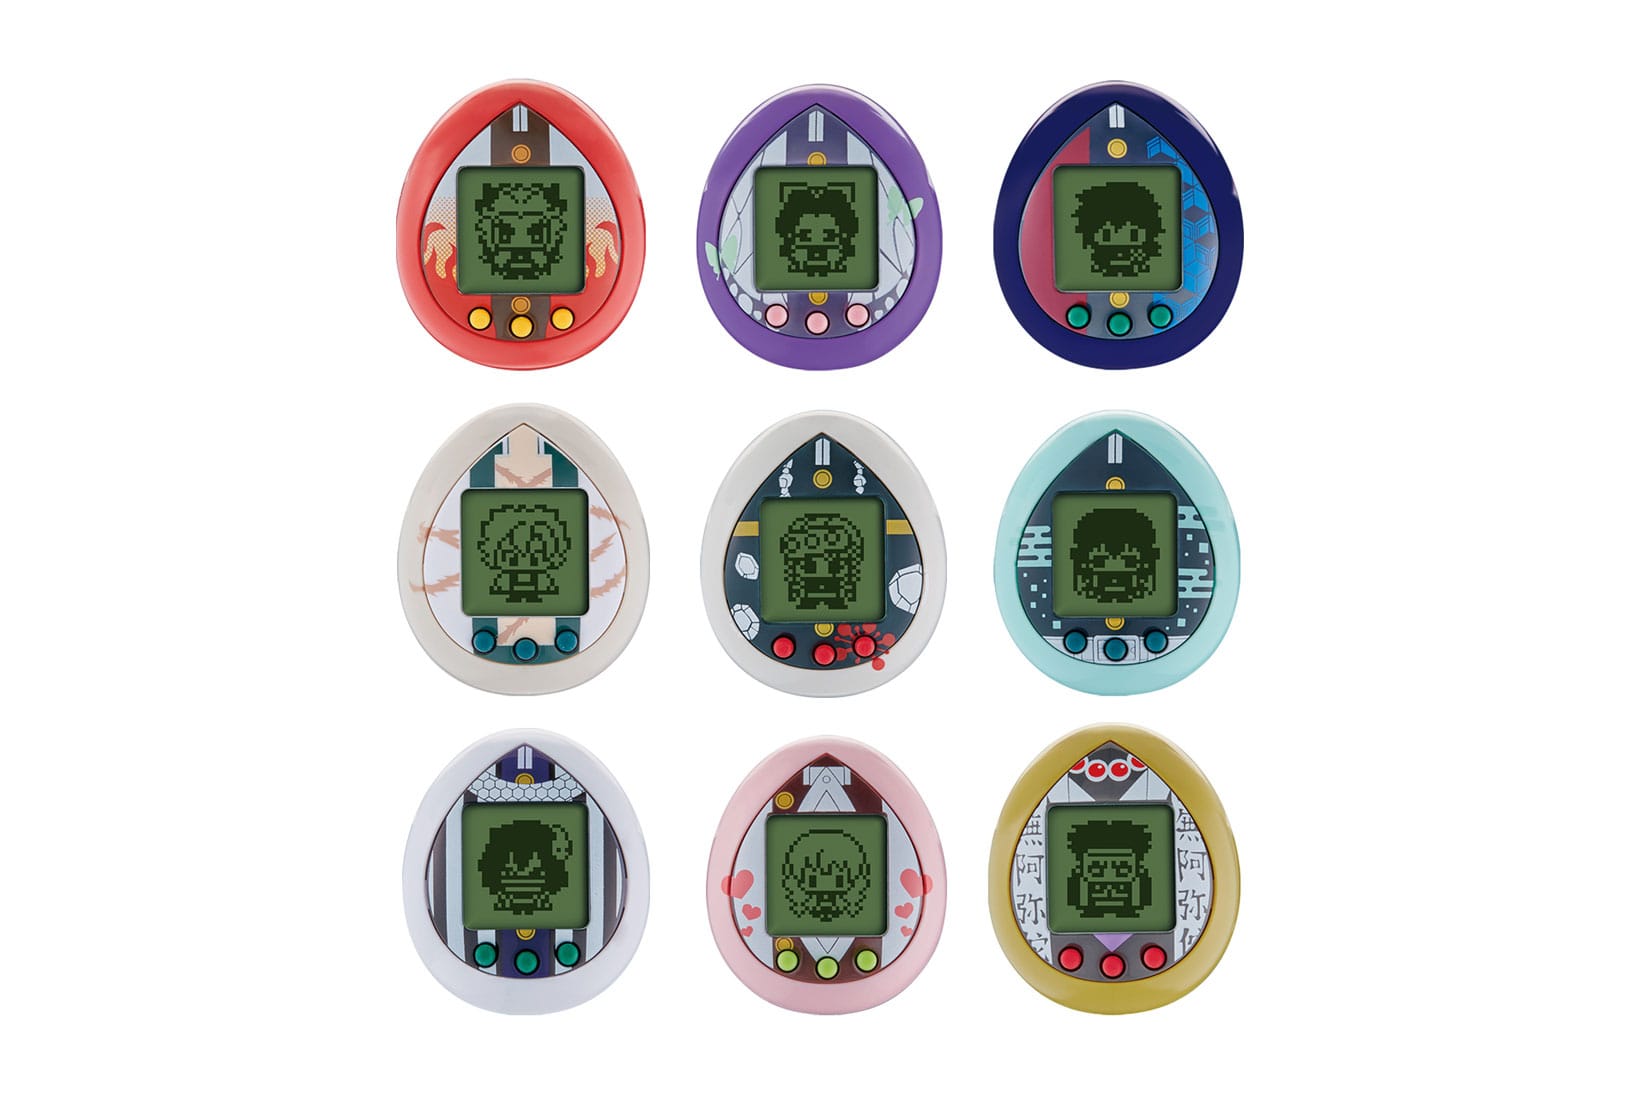 Here Are All the Tamagotchi with Anime Characters - Siliconera